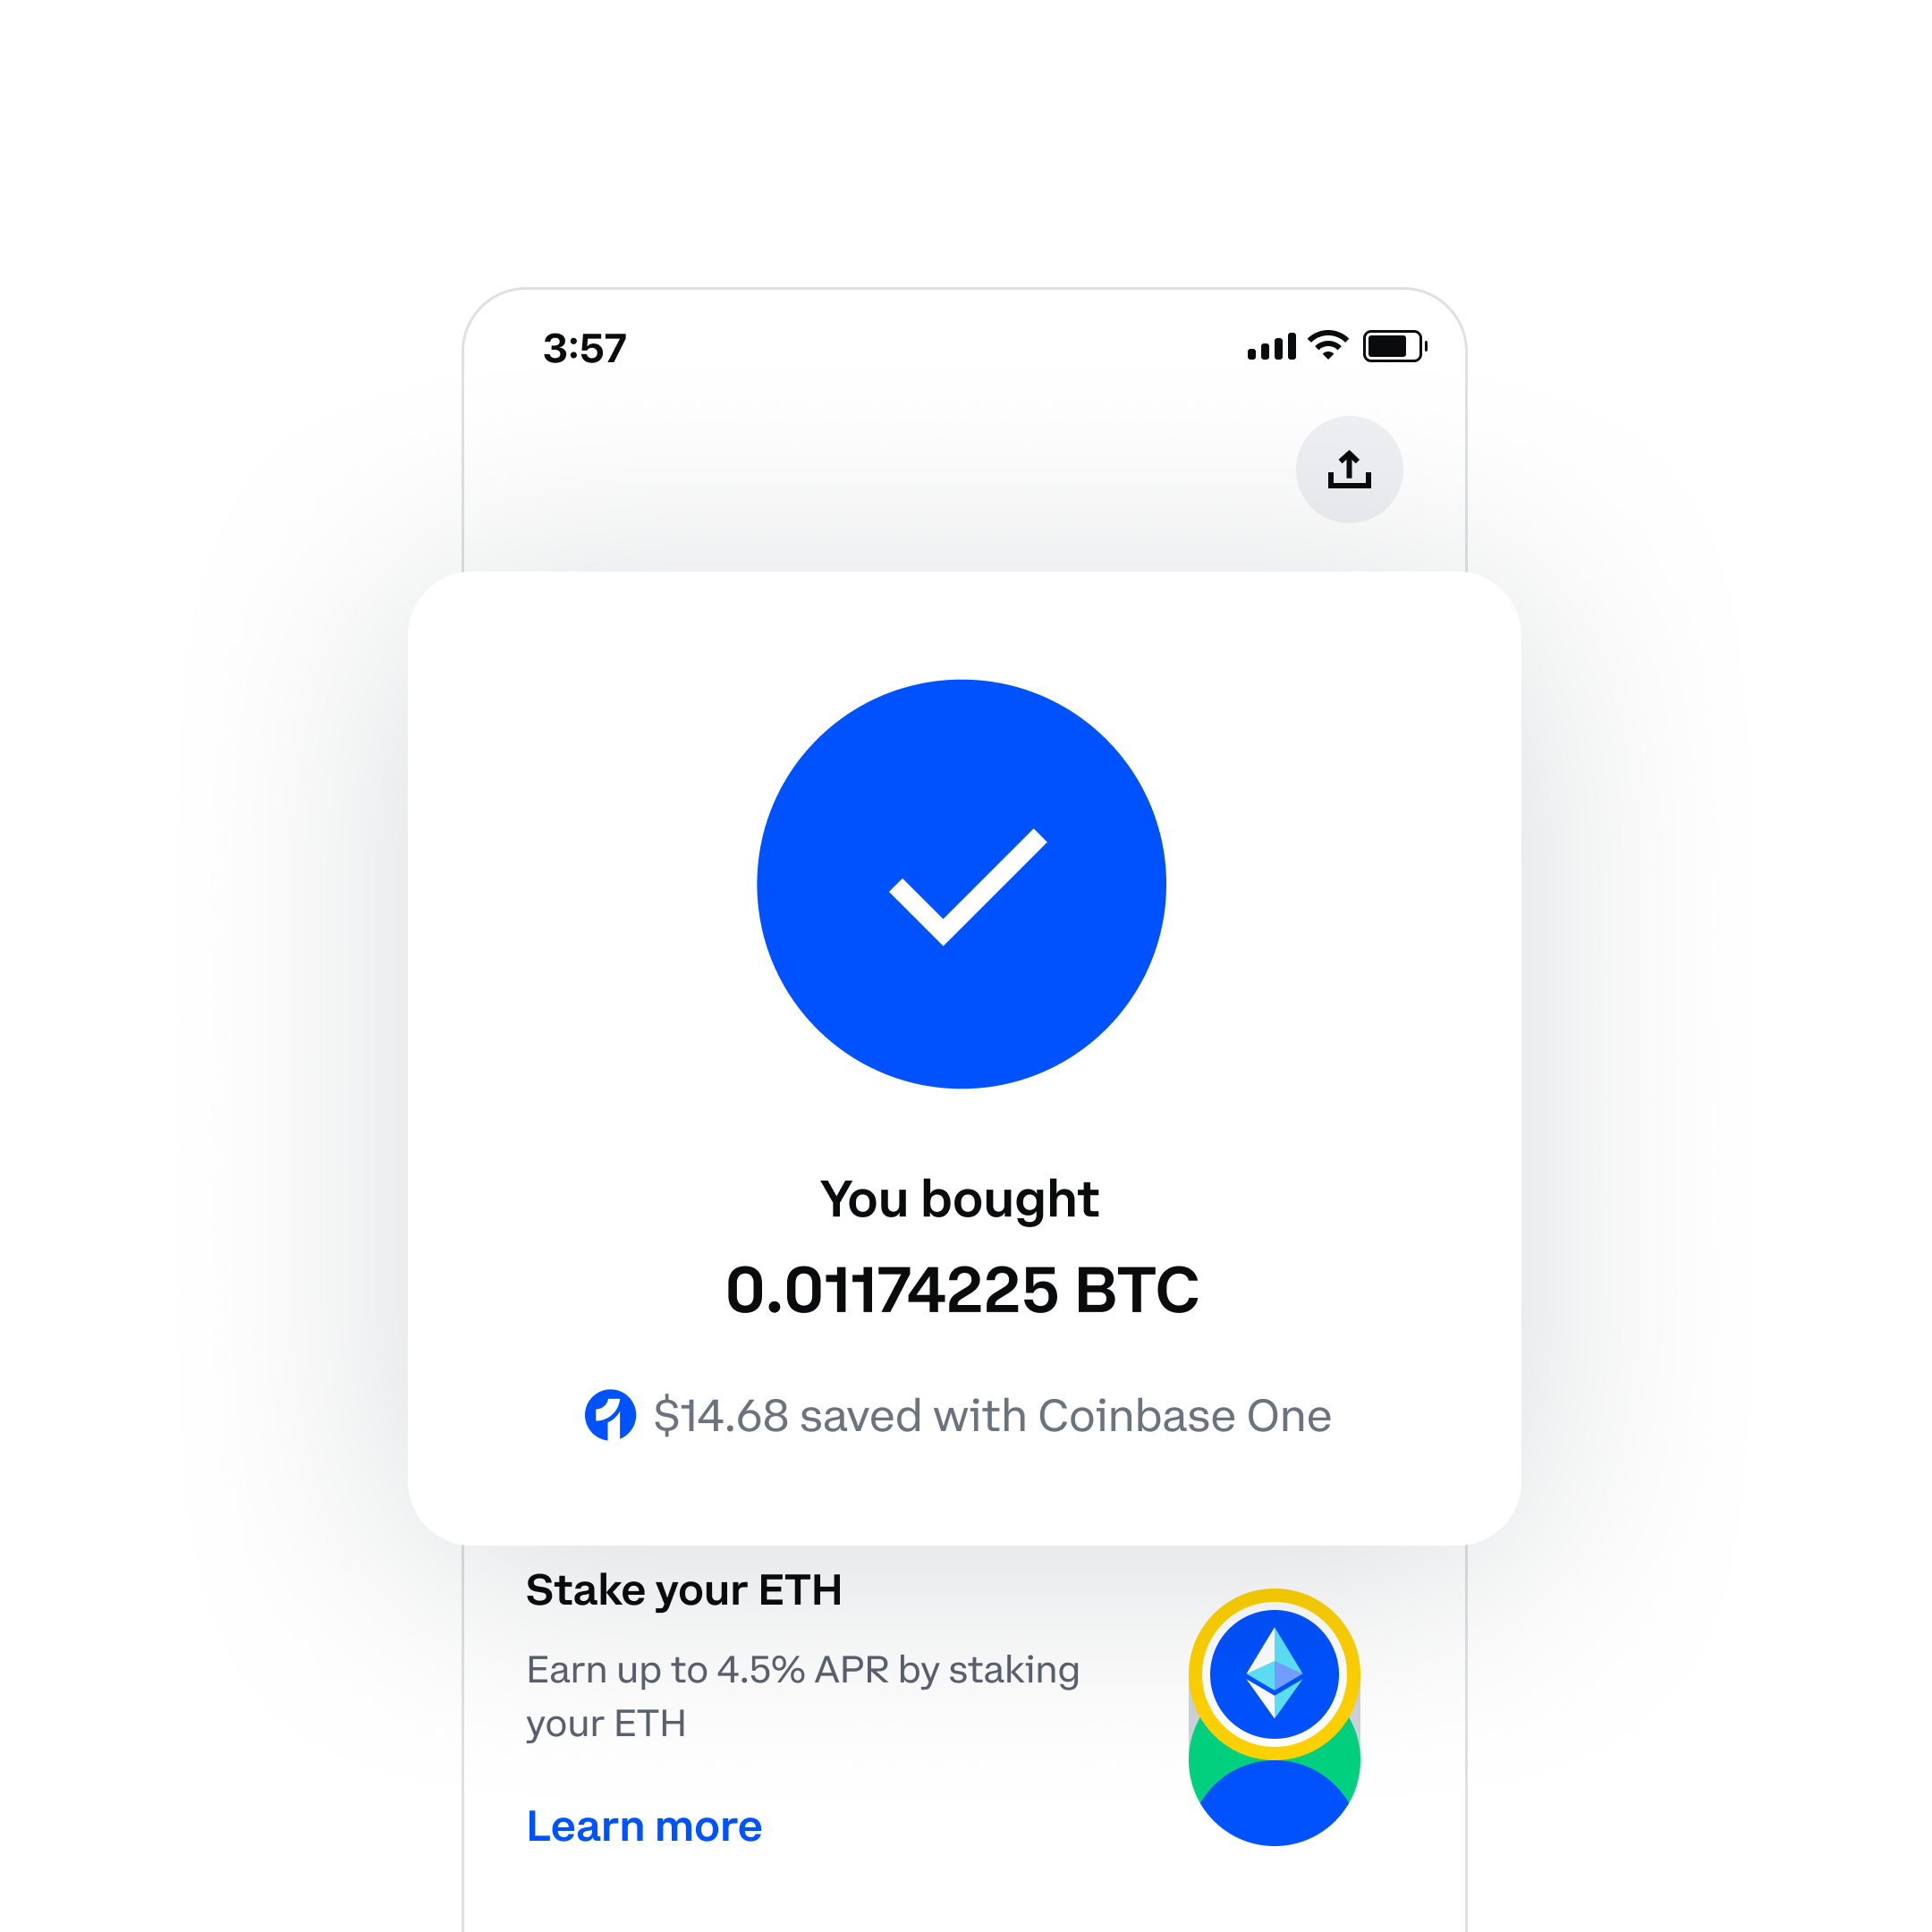 How to Move Crypto From Coinbase to Wallet | CoinLedger